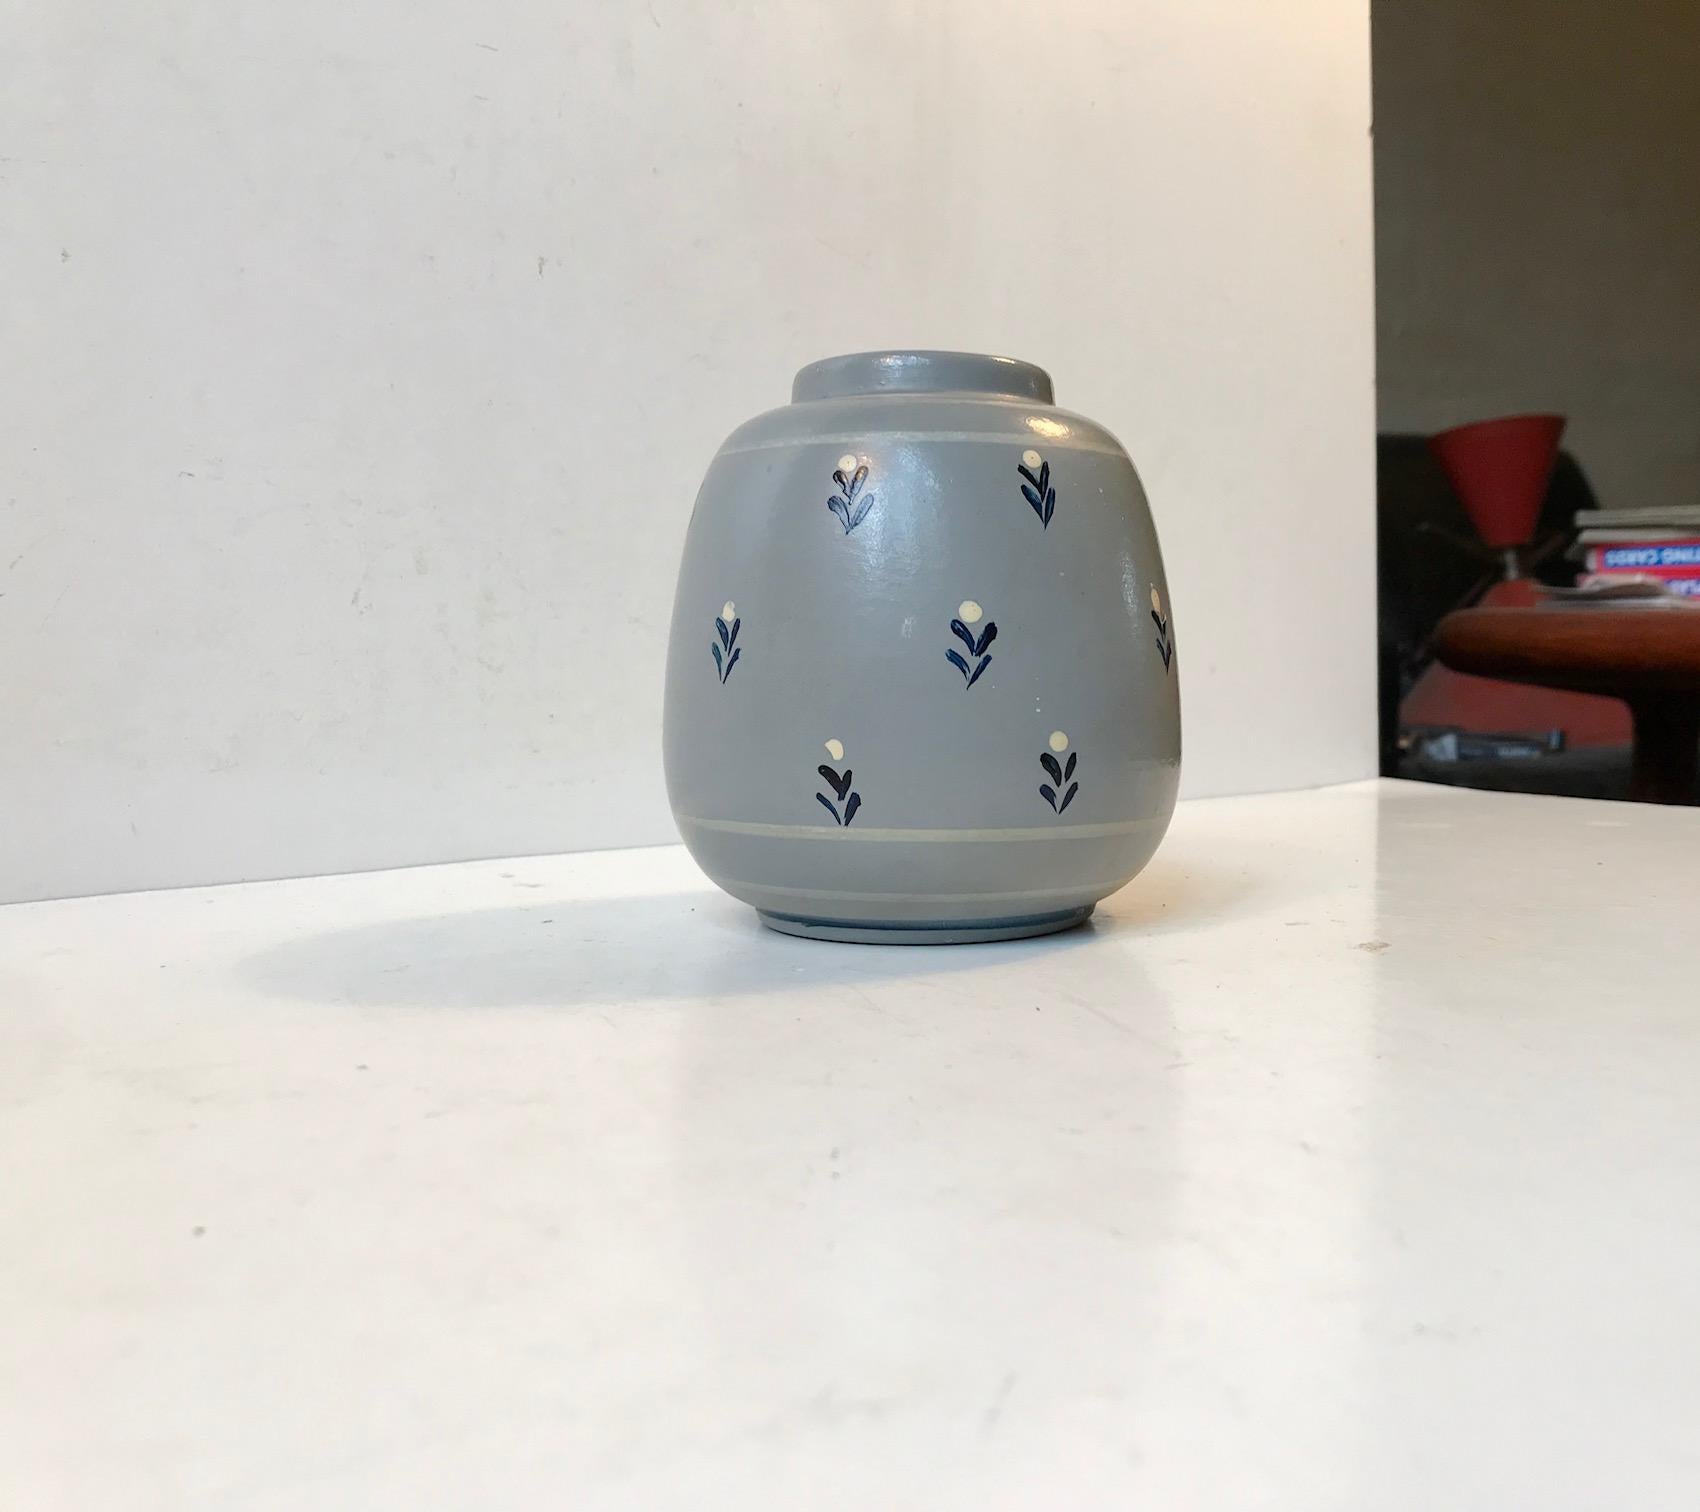 Small grenade shaped earthenware vase with elefant grey main paint and hand decorated with small flowers. It was made by Knabstrup in Denmark during the 1920s or 1930s in a style derived from French and German Art Deco era pottery.